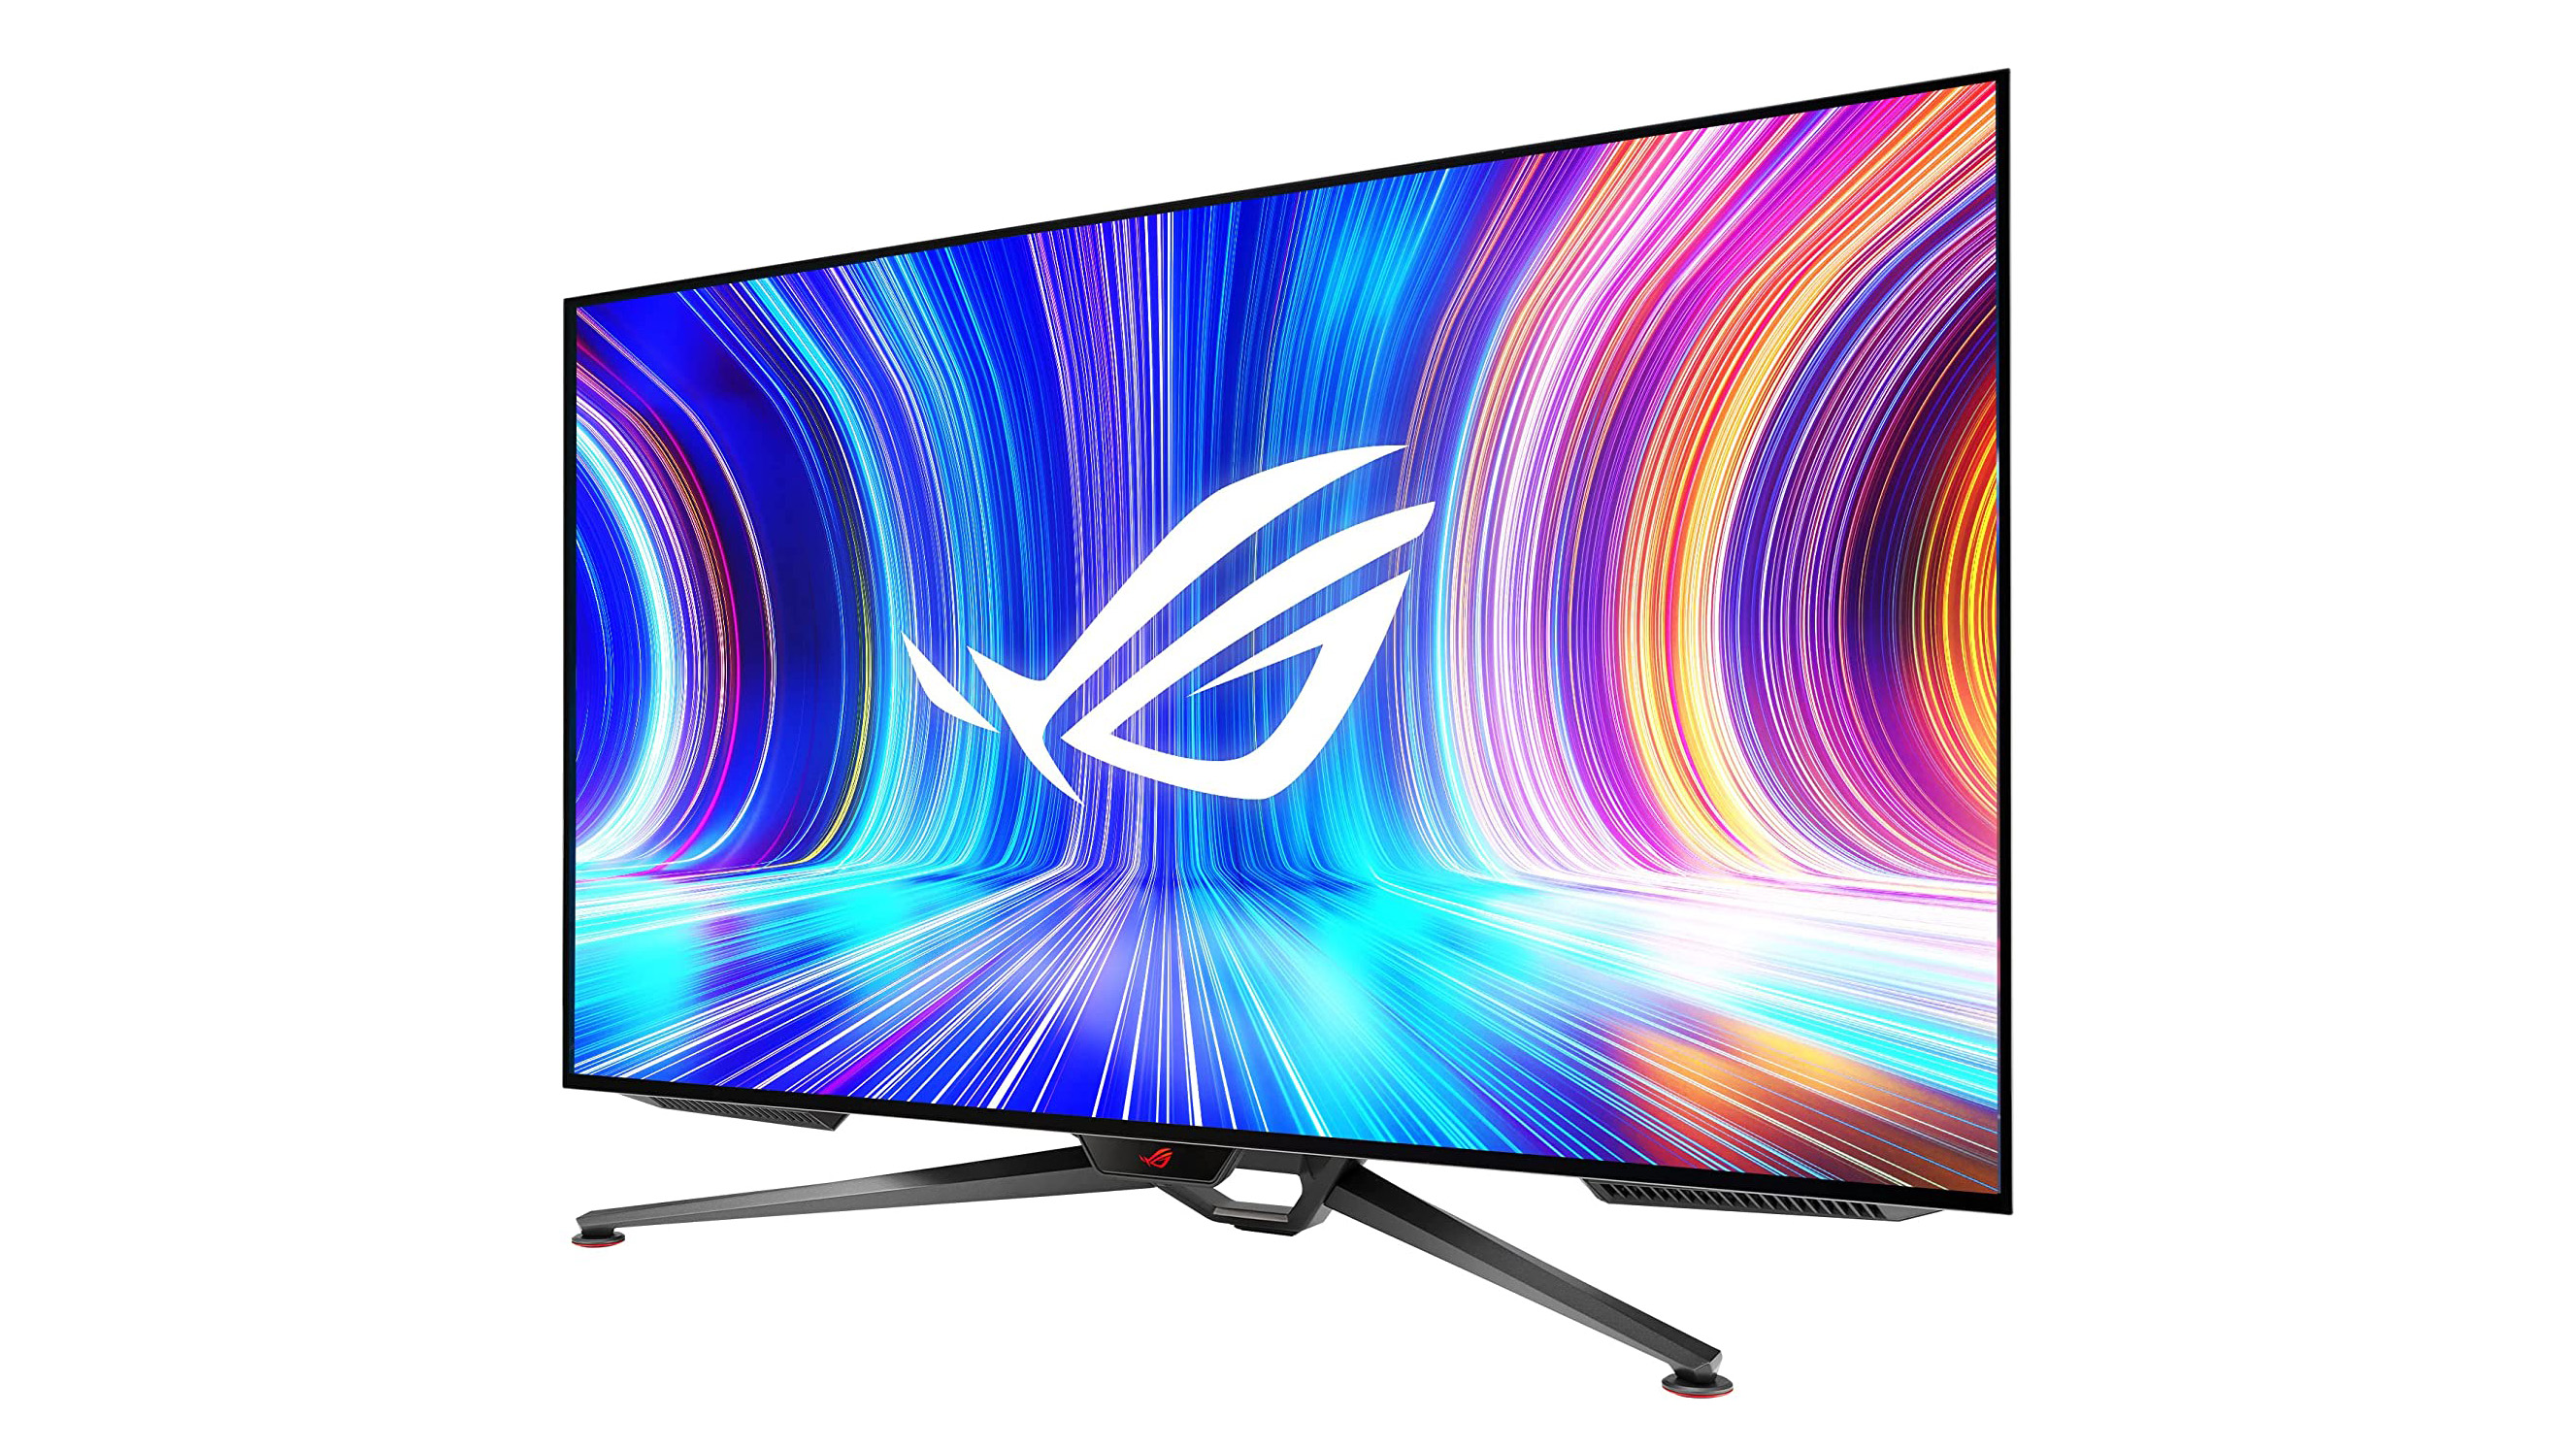 Asus ROG Swift OLED PG42UQ, one of the best monitors for PS5, against a white background